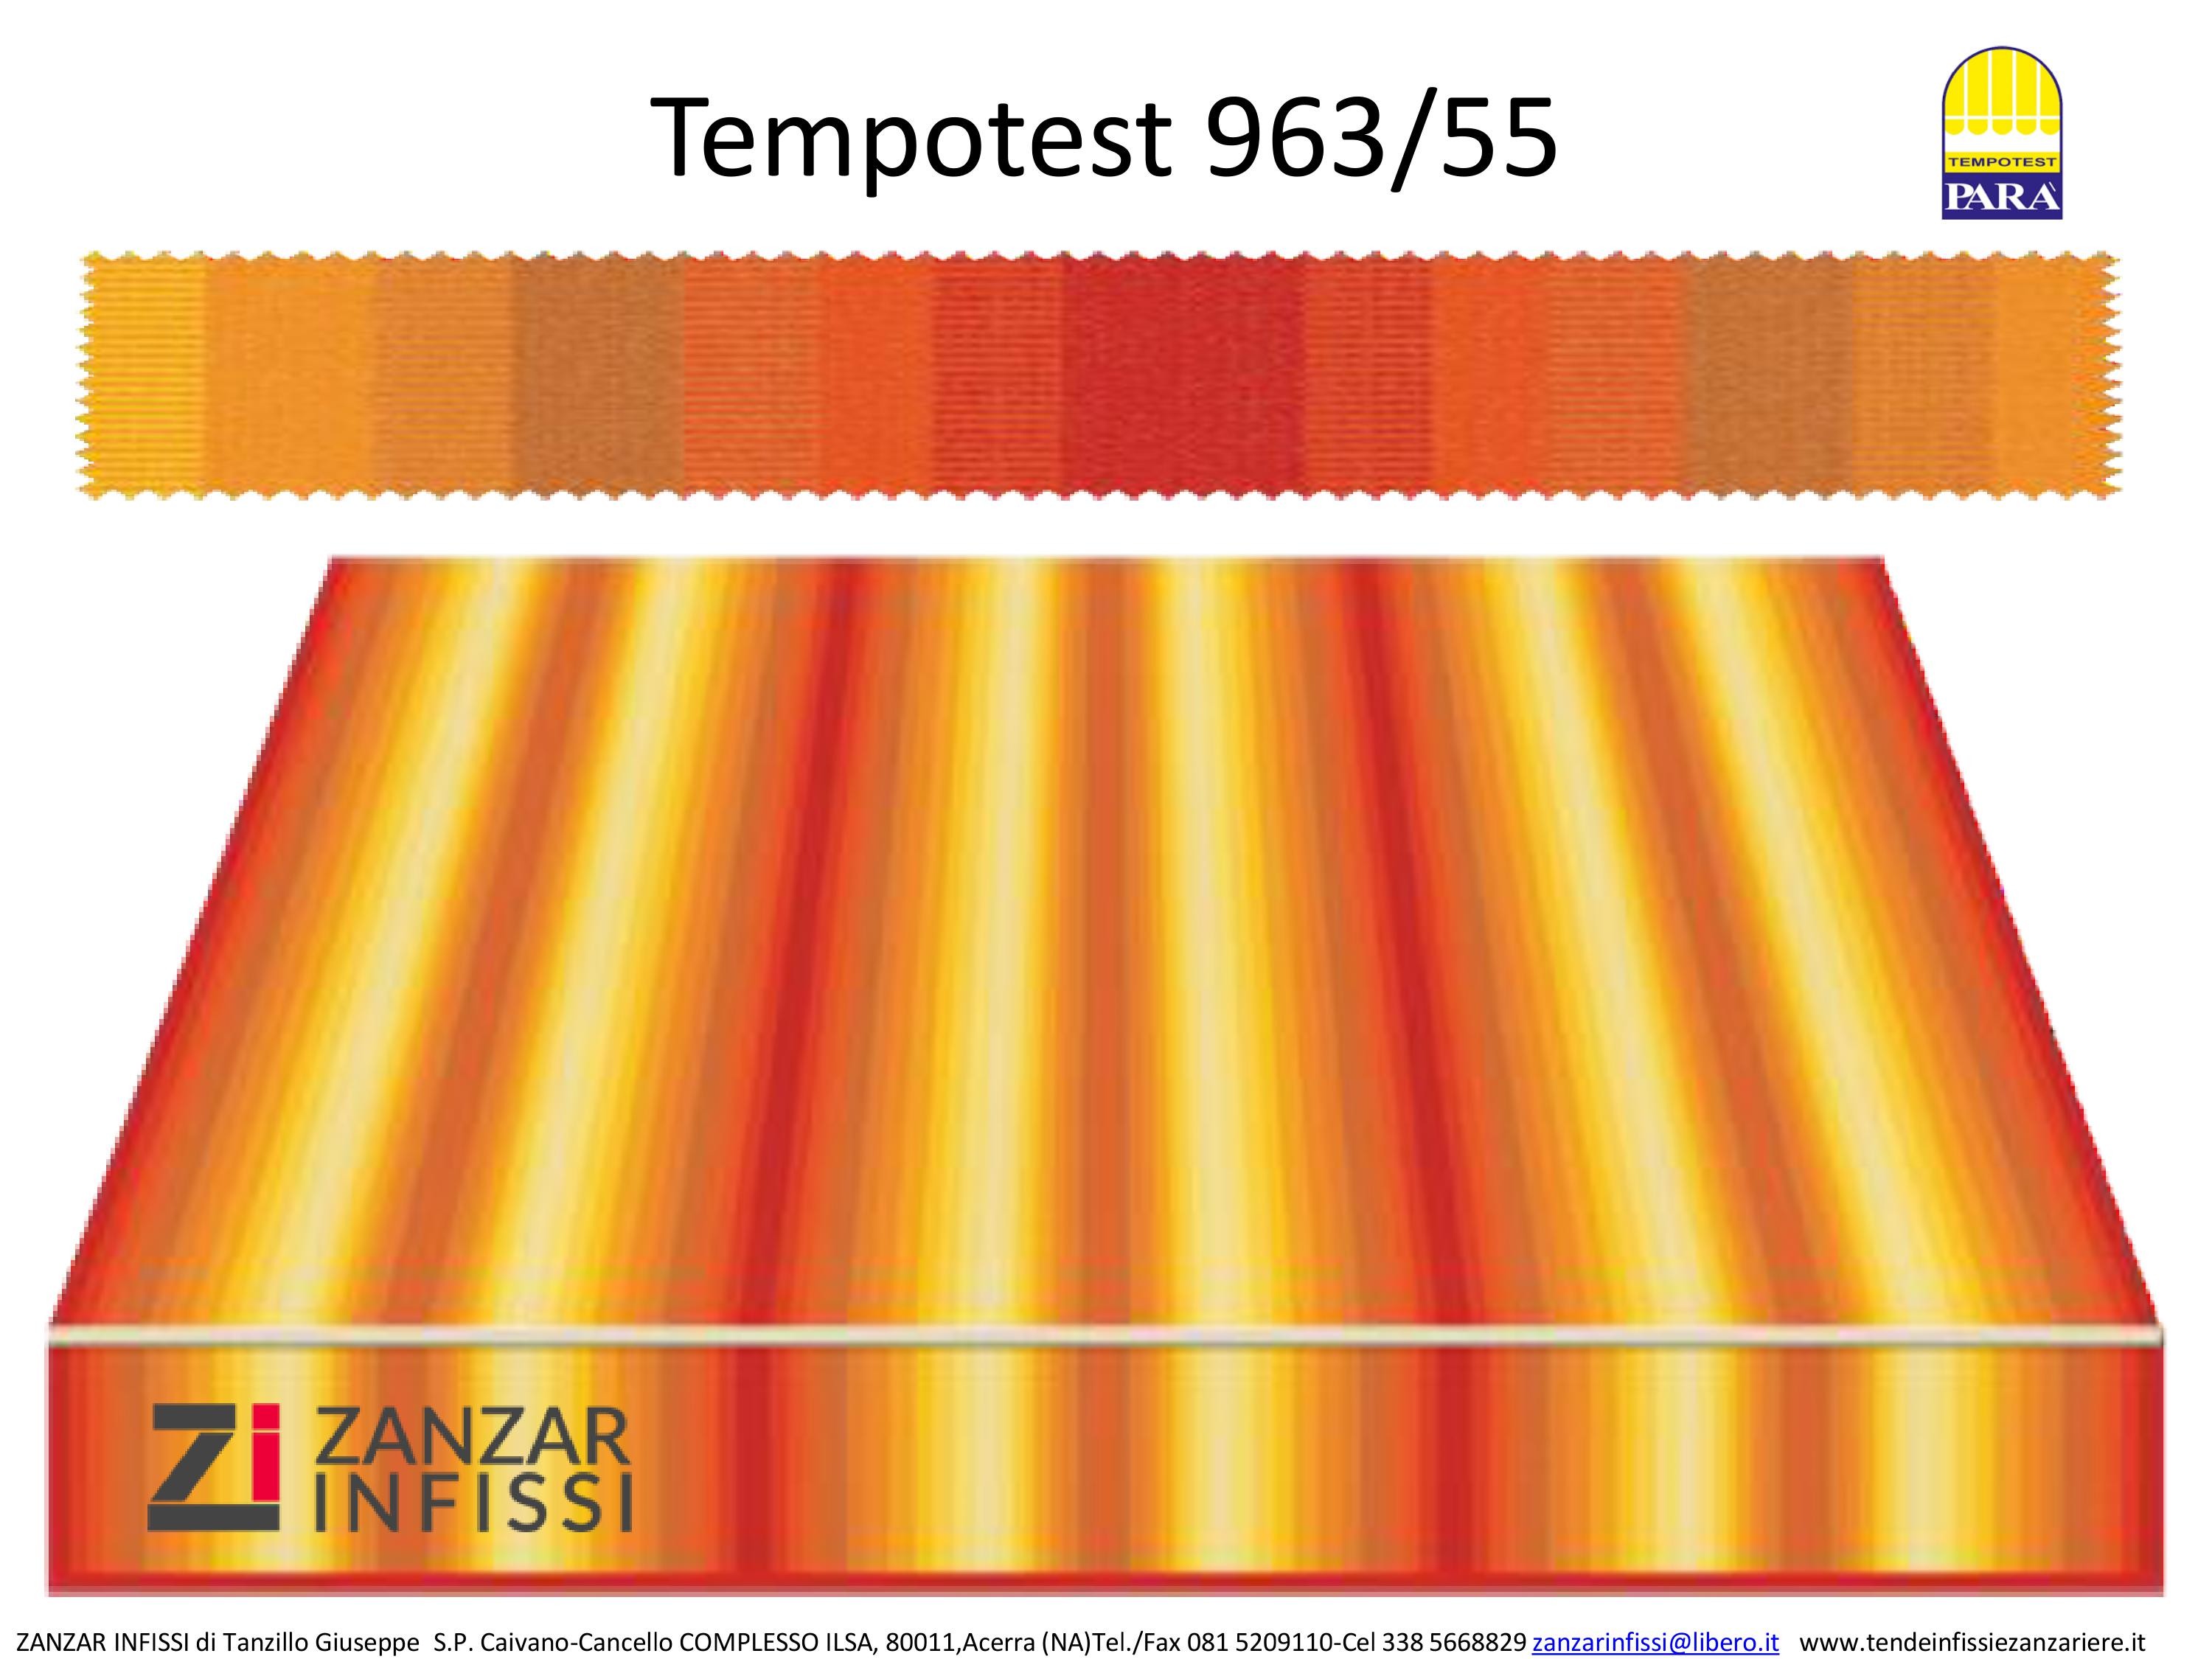 Tempotest 963/55